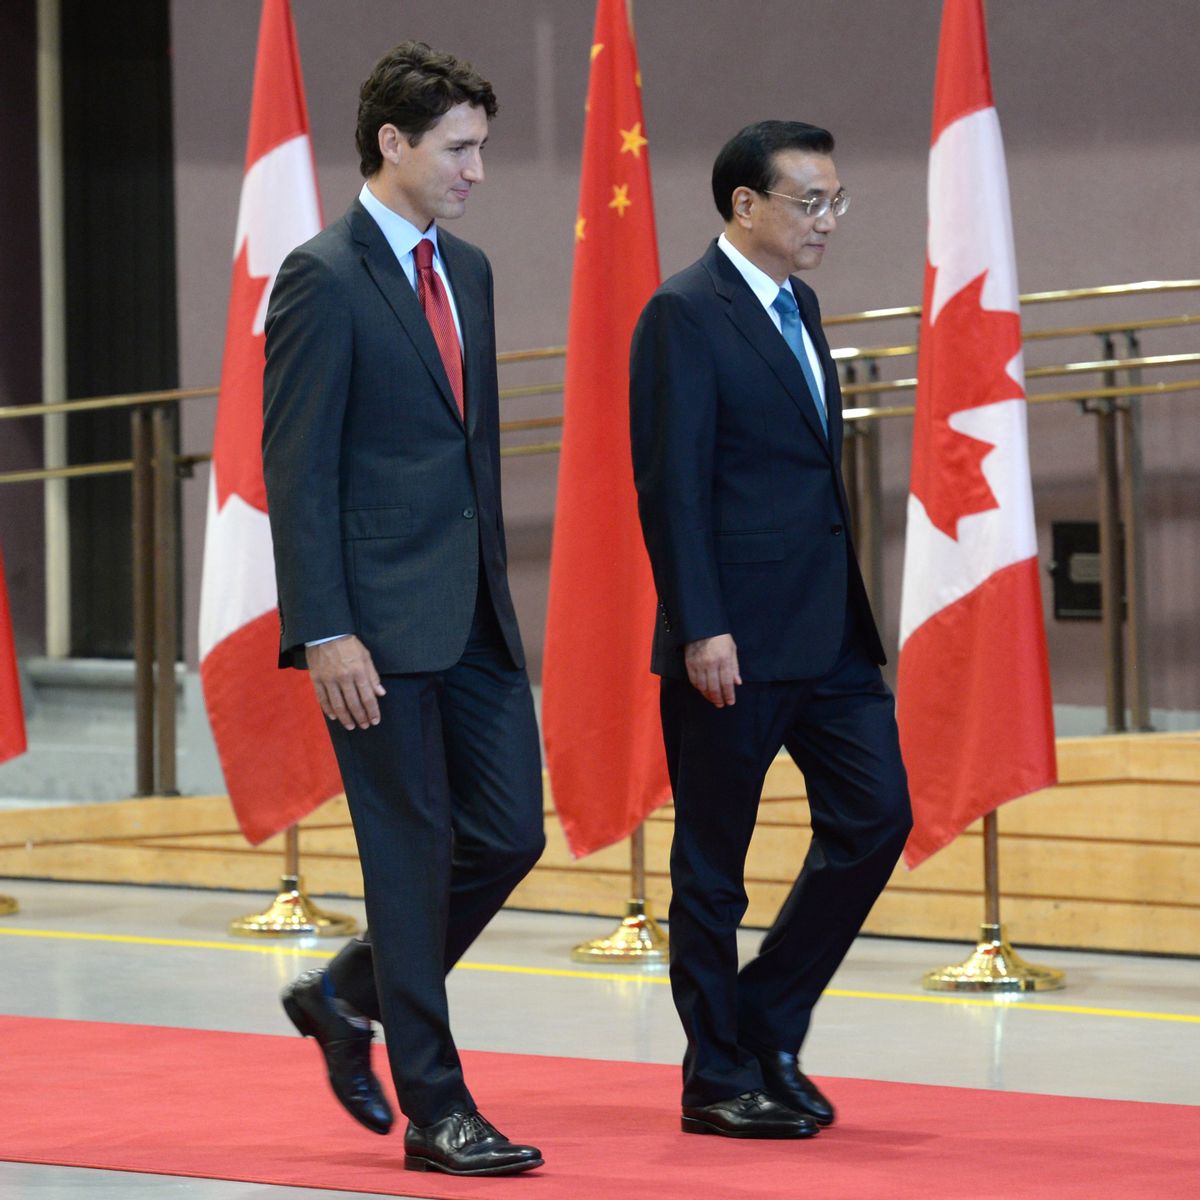 Canadian Premier Justin Trudeau, left, and Premier of the State Council of the Peoples Republic of China Li Keqiang attends a welcoming ceremony with military honours in Ottawa on Thursday, Sept.22, 2016. (Adrian Wyld/The Canadian Press via AP) (AP)